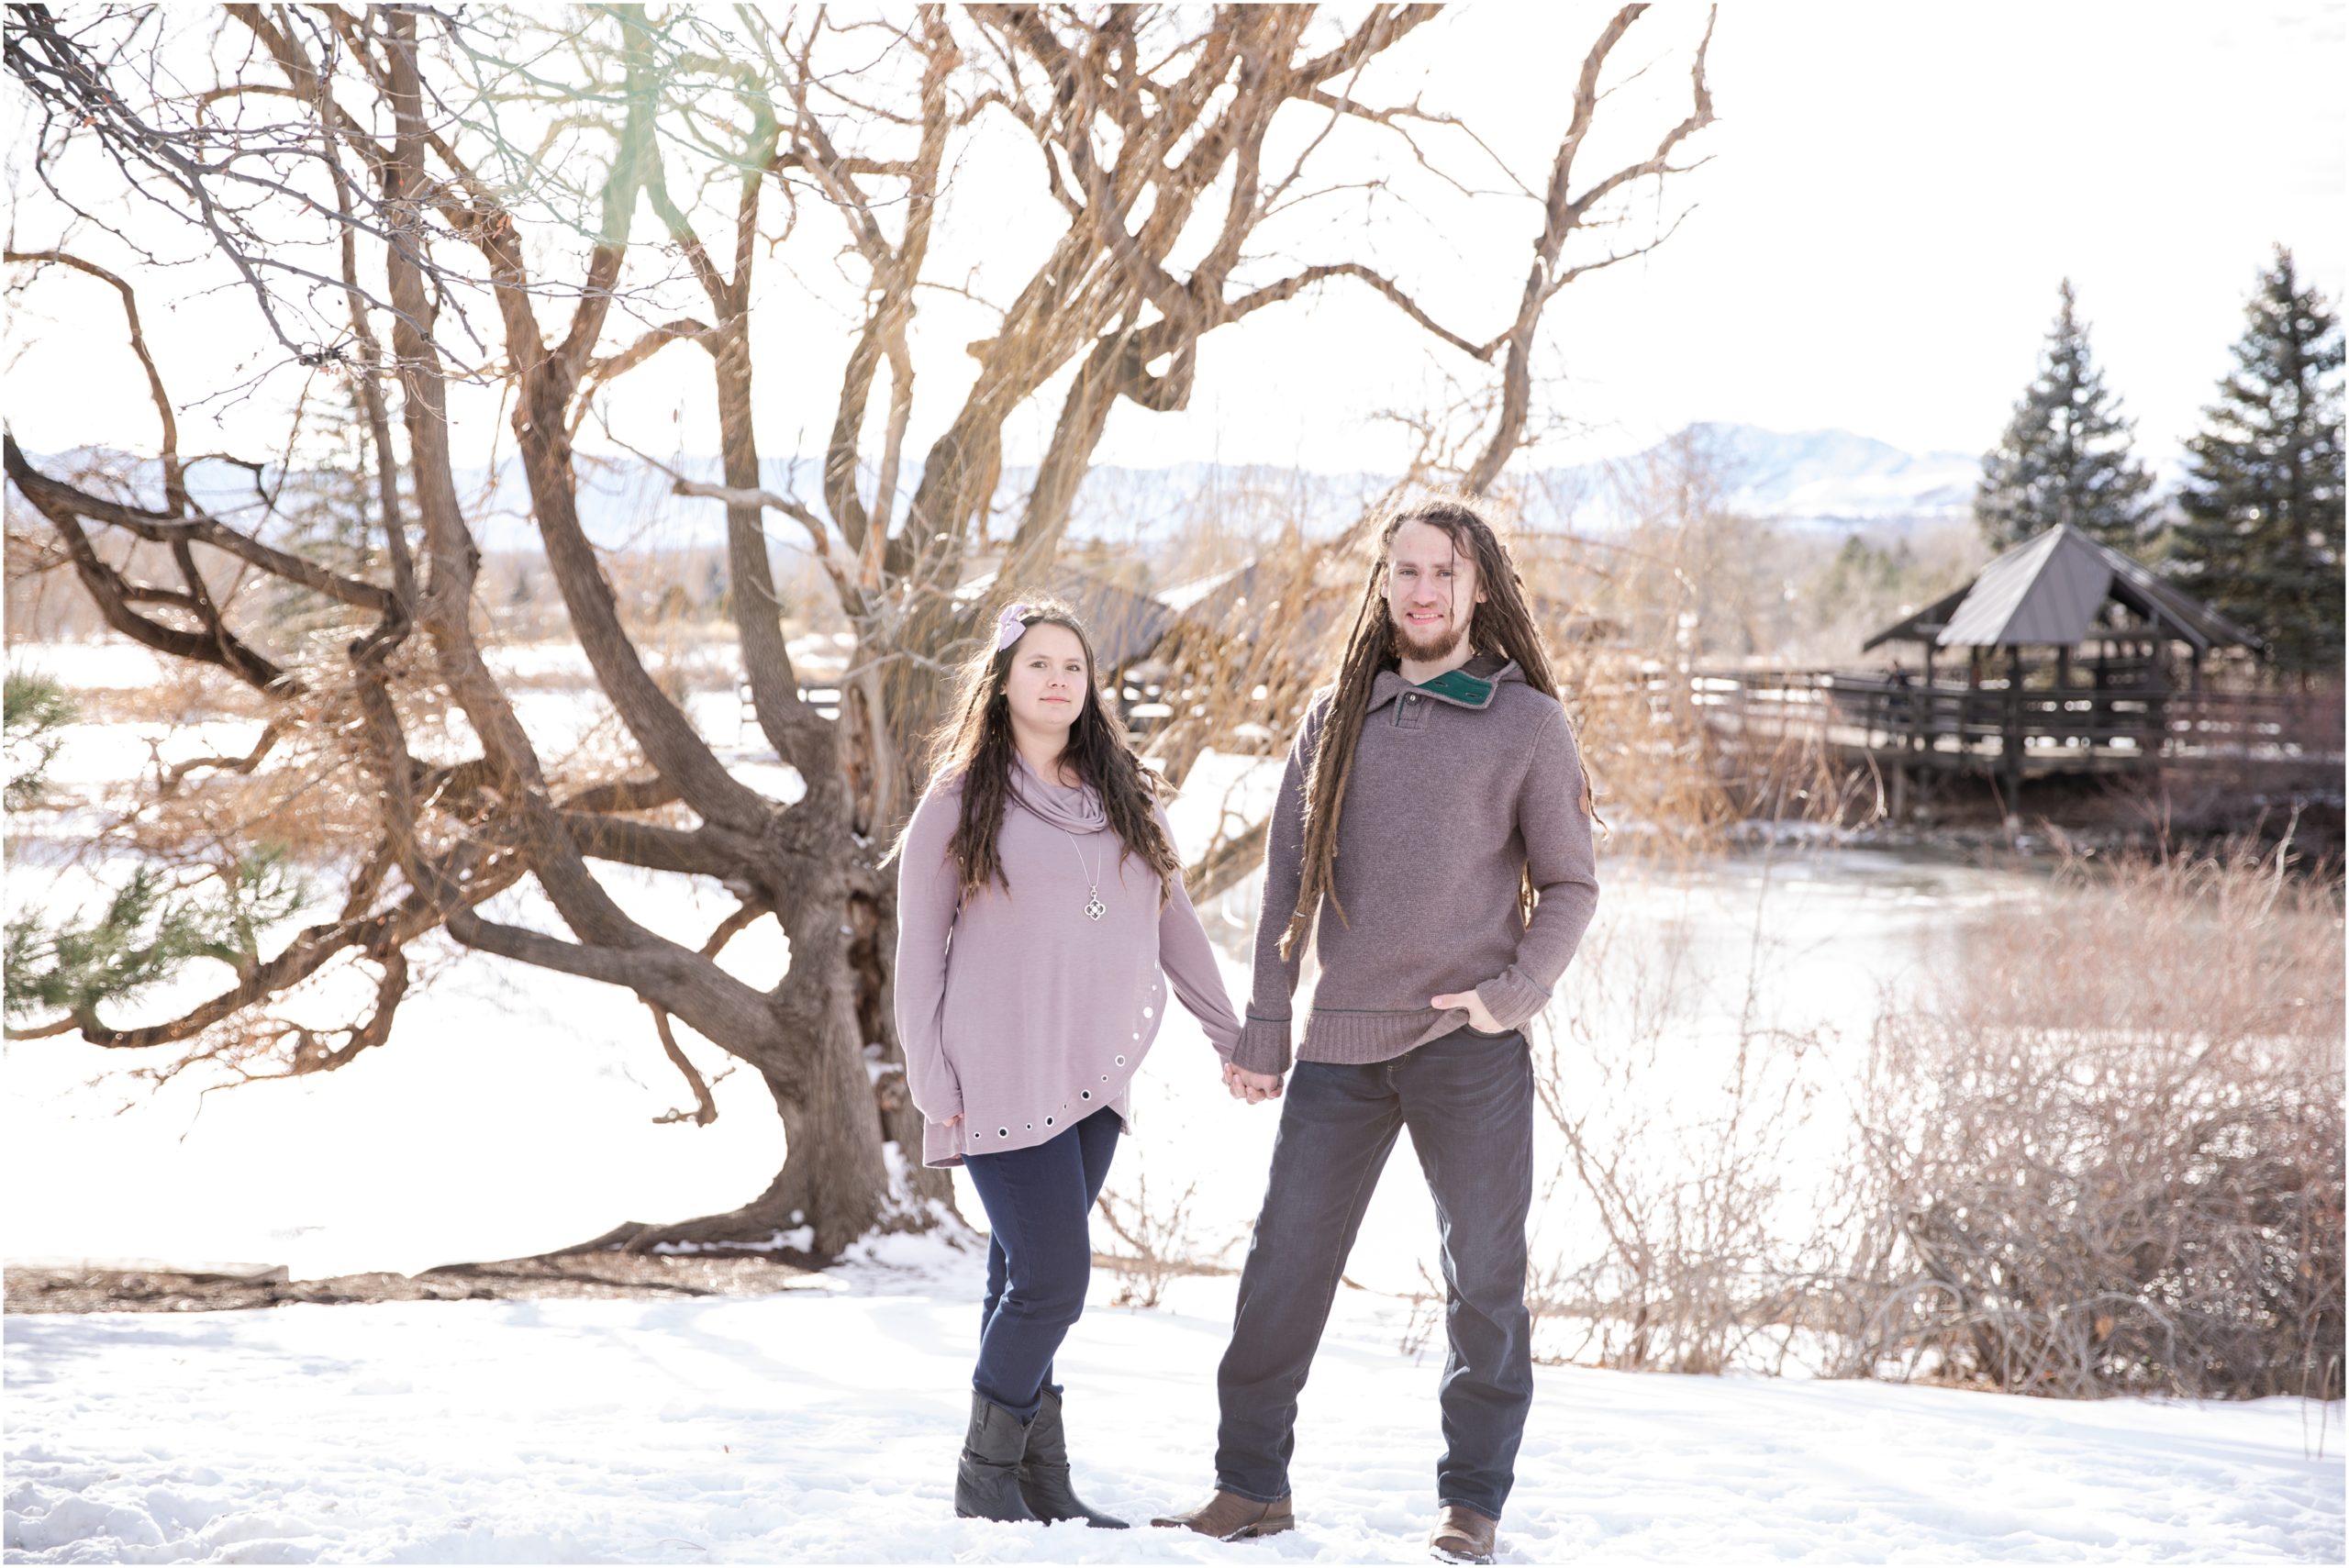 Ethan and Sabrinas Engagements Session at Belmar Park in Lakewood Colorado